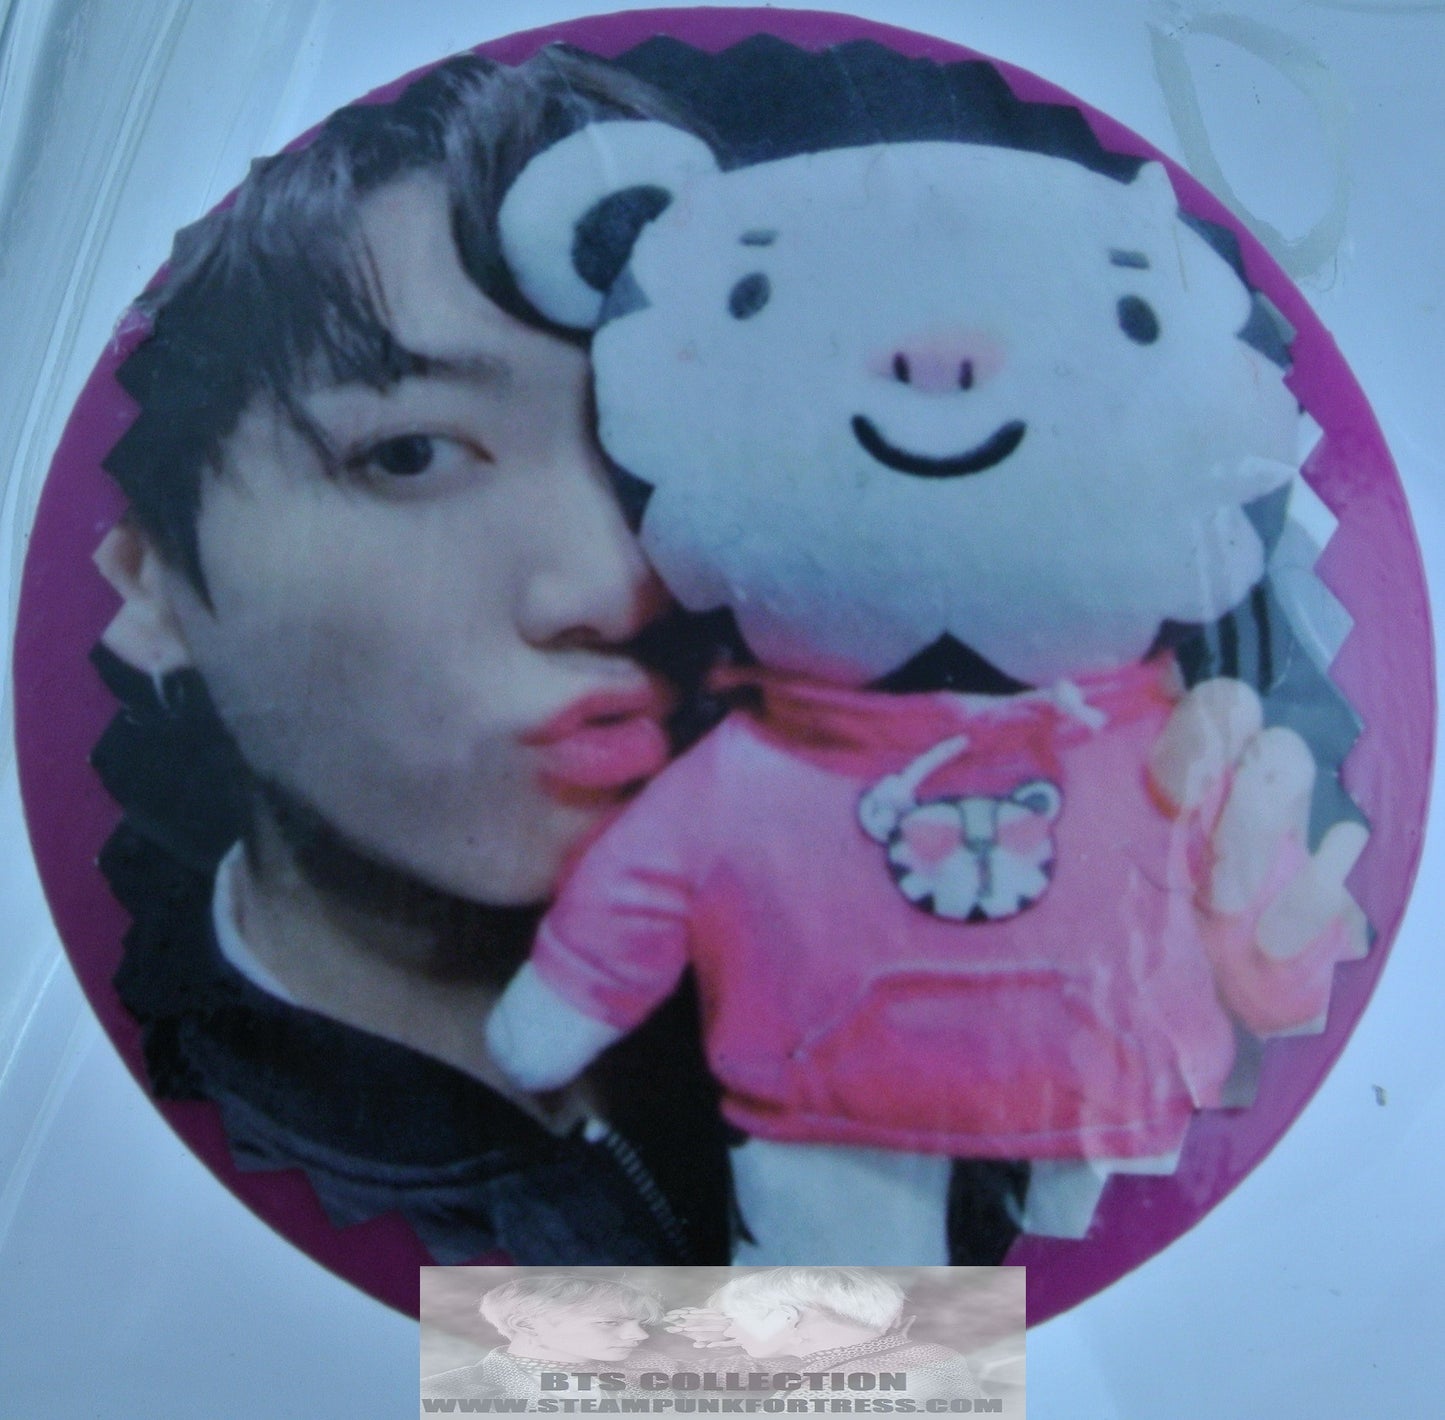 BTS JEON JUNGKOOK STUFFIE PINK 2 SIDED COMPACT MIRROR LIGHT UP